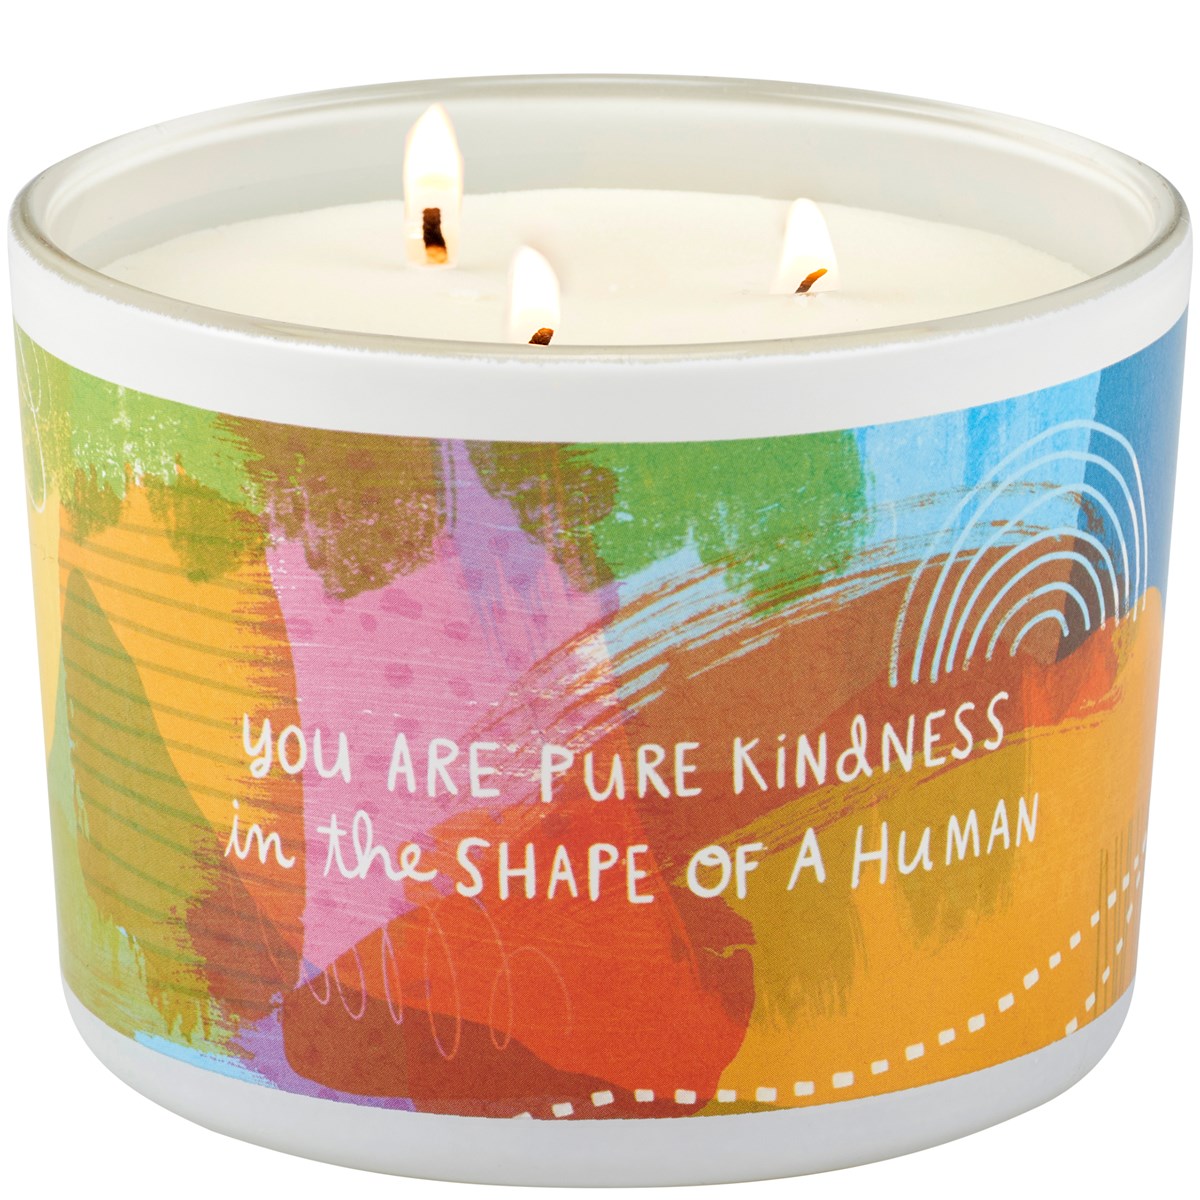 Pure Kindness Jar Candle - Soy Wax, Glass, Cotton